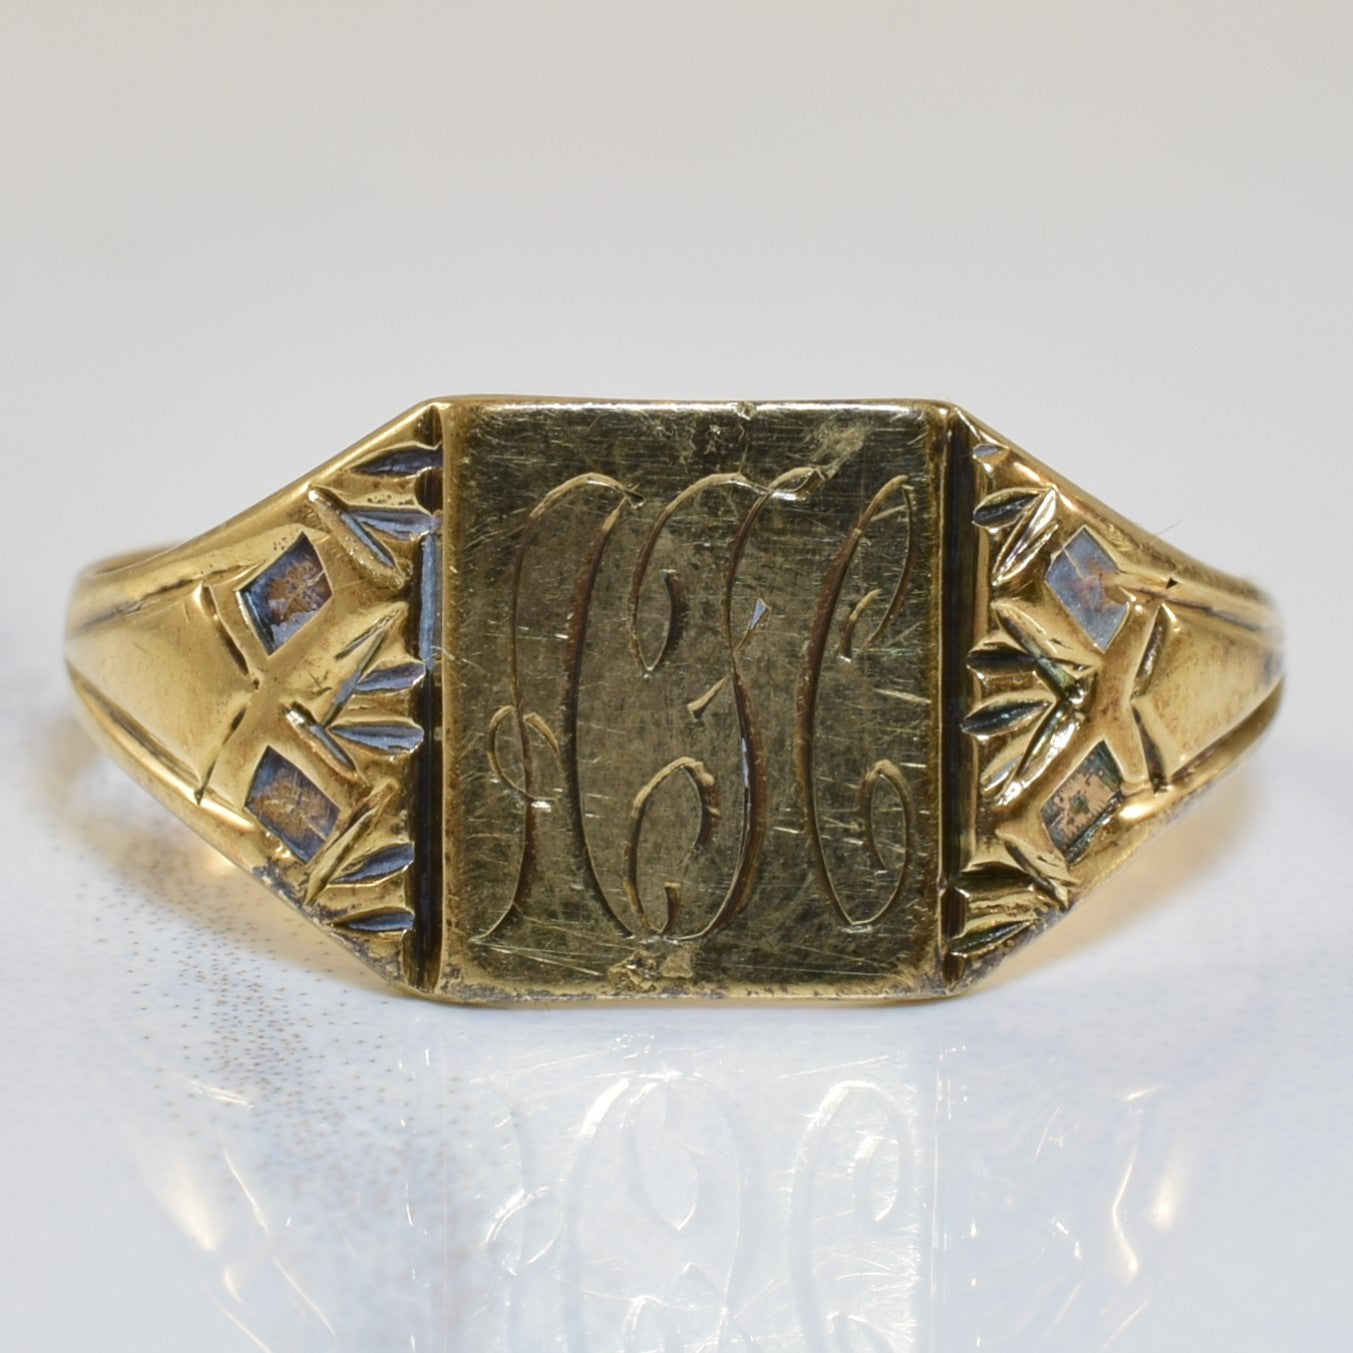 Early 1900s 'AFC' Engraved Signet Ring | SZ 7 |